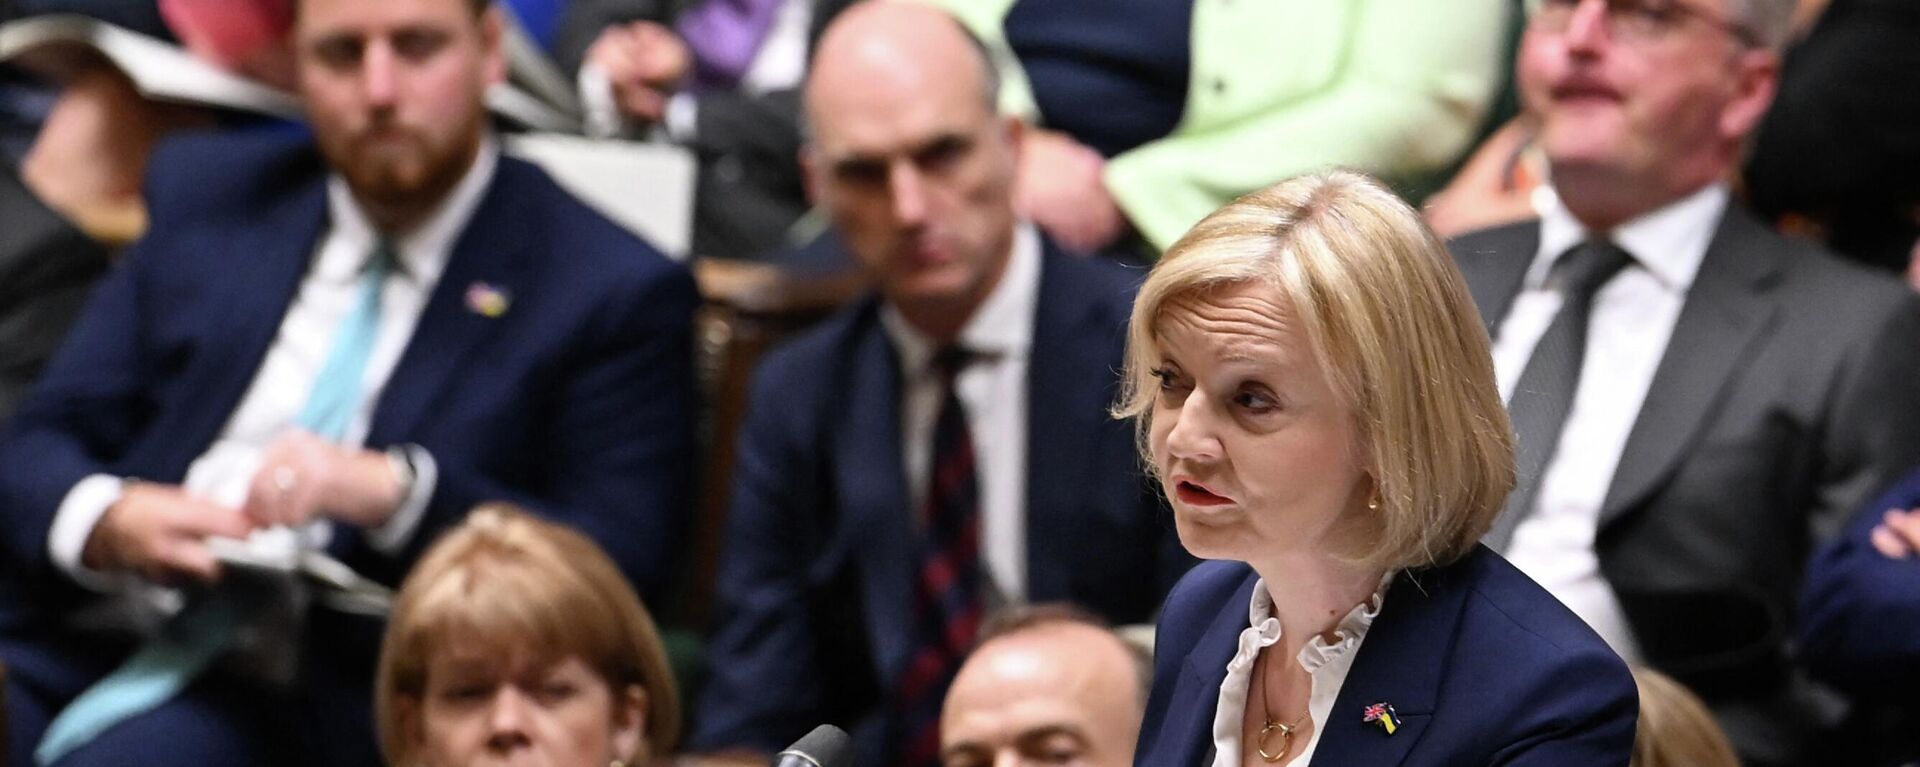 British Prime Minister Liz Truss speaks during her first weekly Prime Minister's Questions (PMQs) session at the House of Commons - Sputnik International, 1920, 12.10.2022